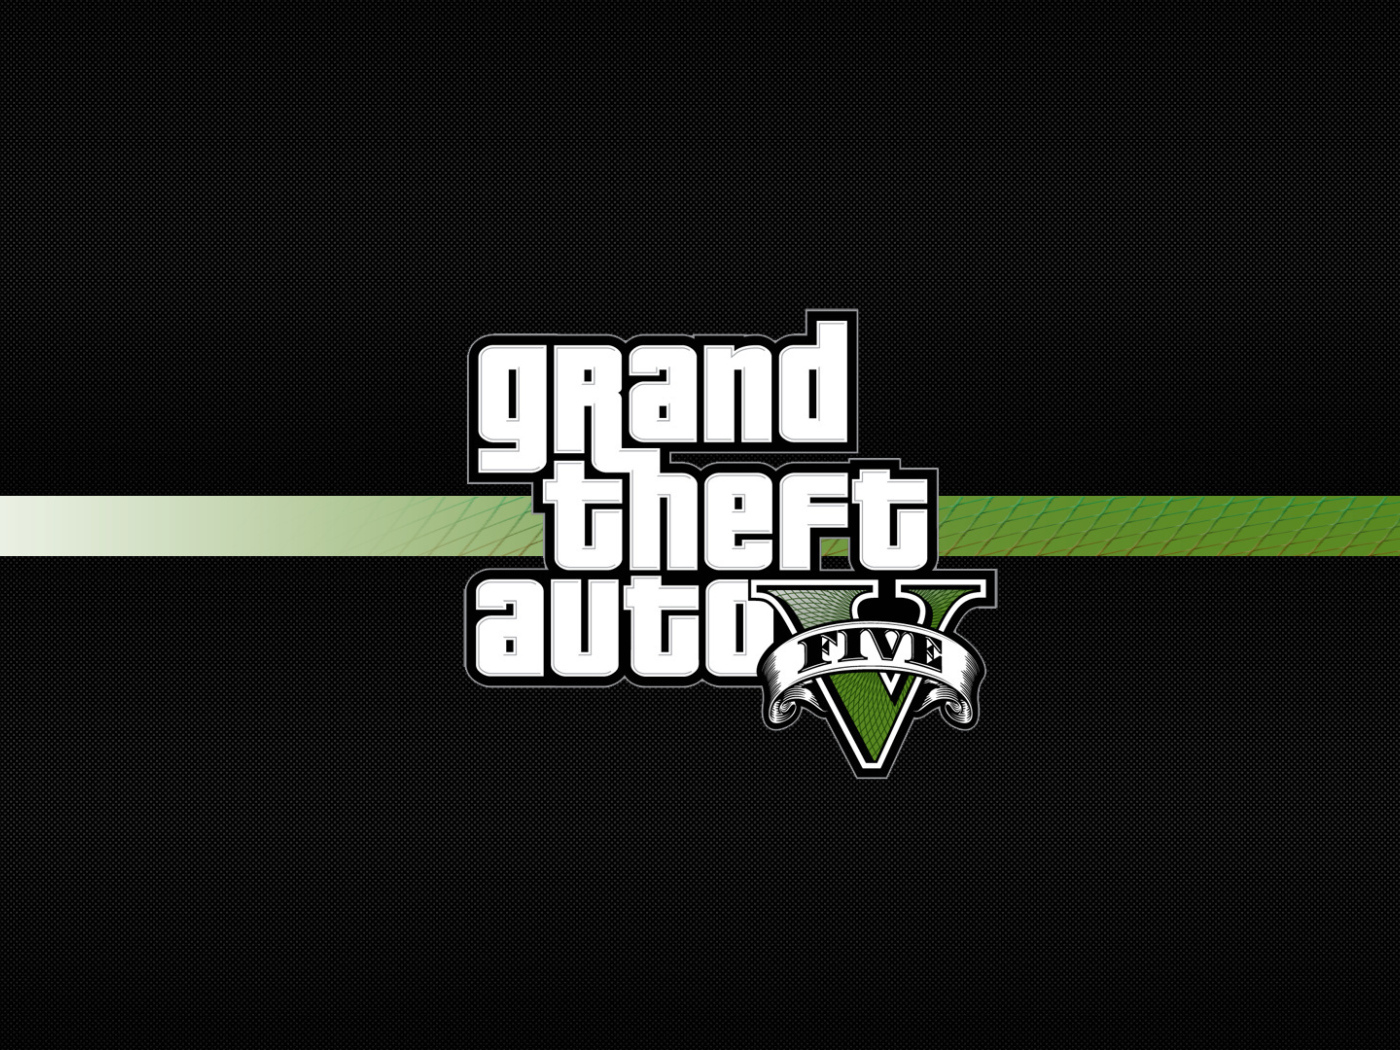 What is the gta 5 theme song фото 18